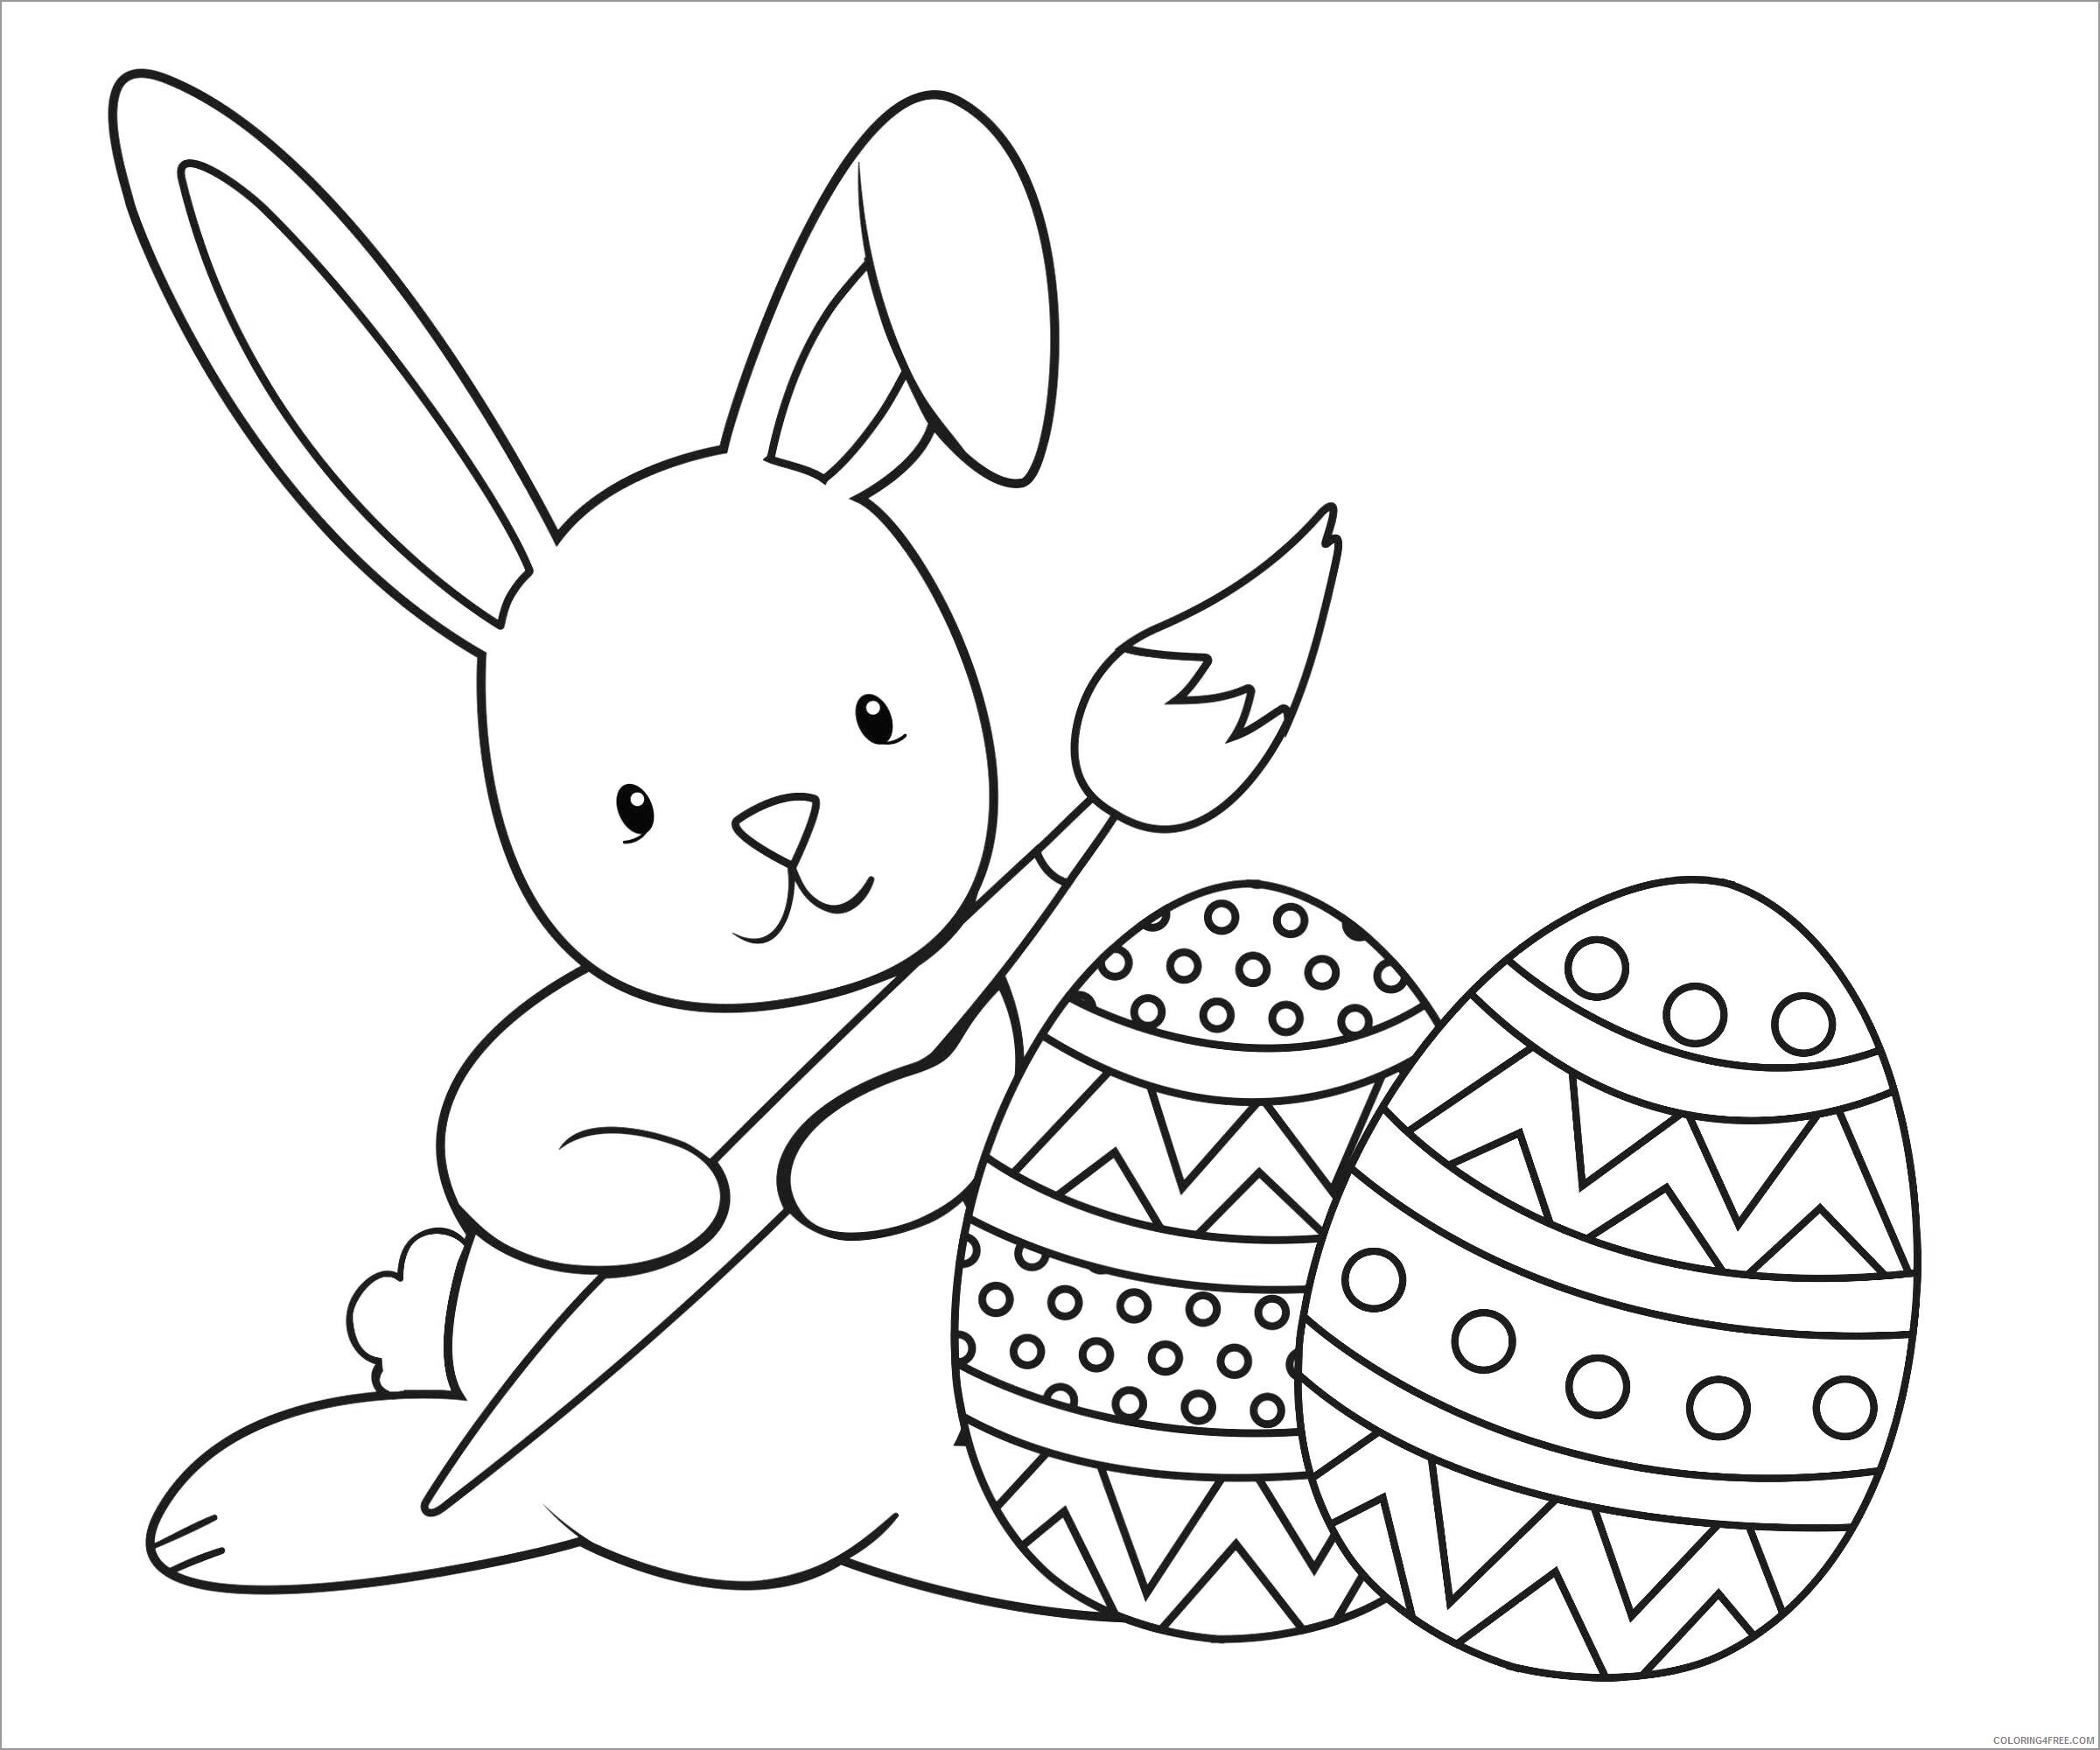 Rabbit Coloring Pages Animal Printable Sheets peter rabbit 2021 4166 Coloring4free